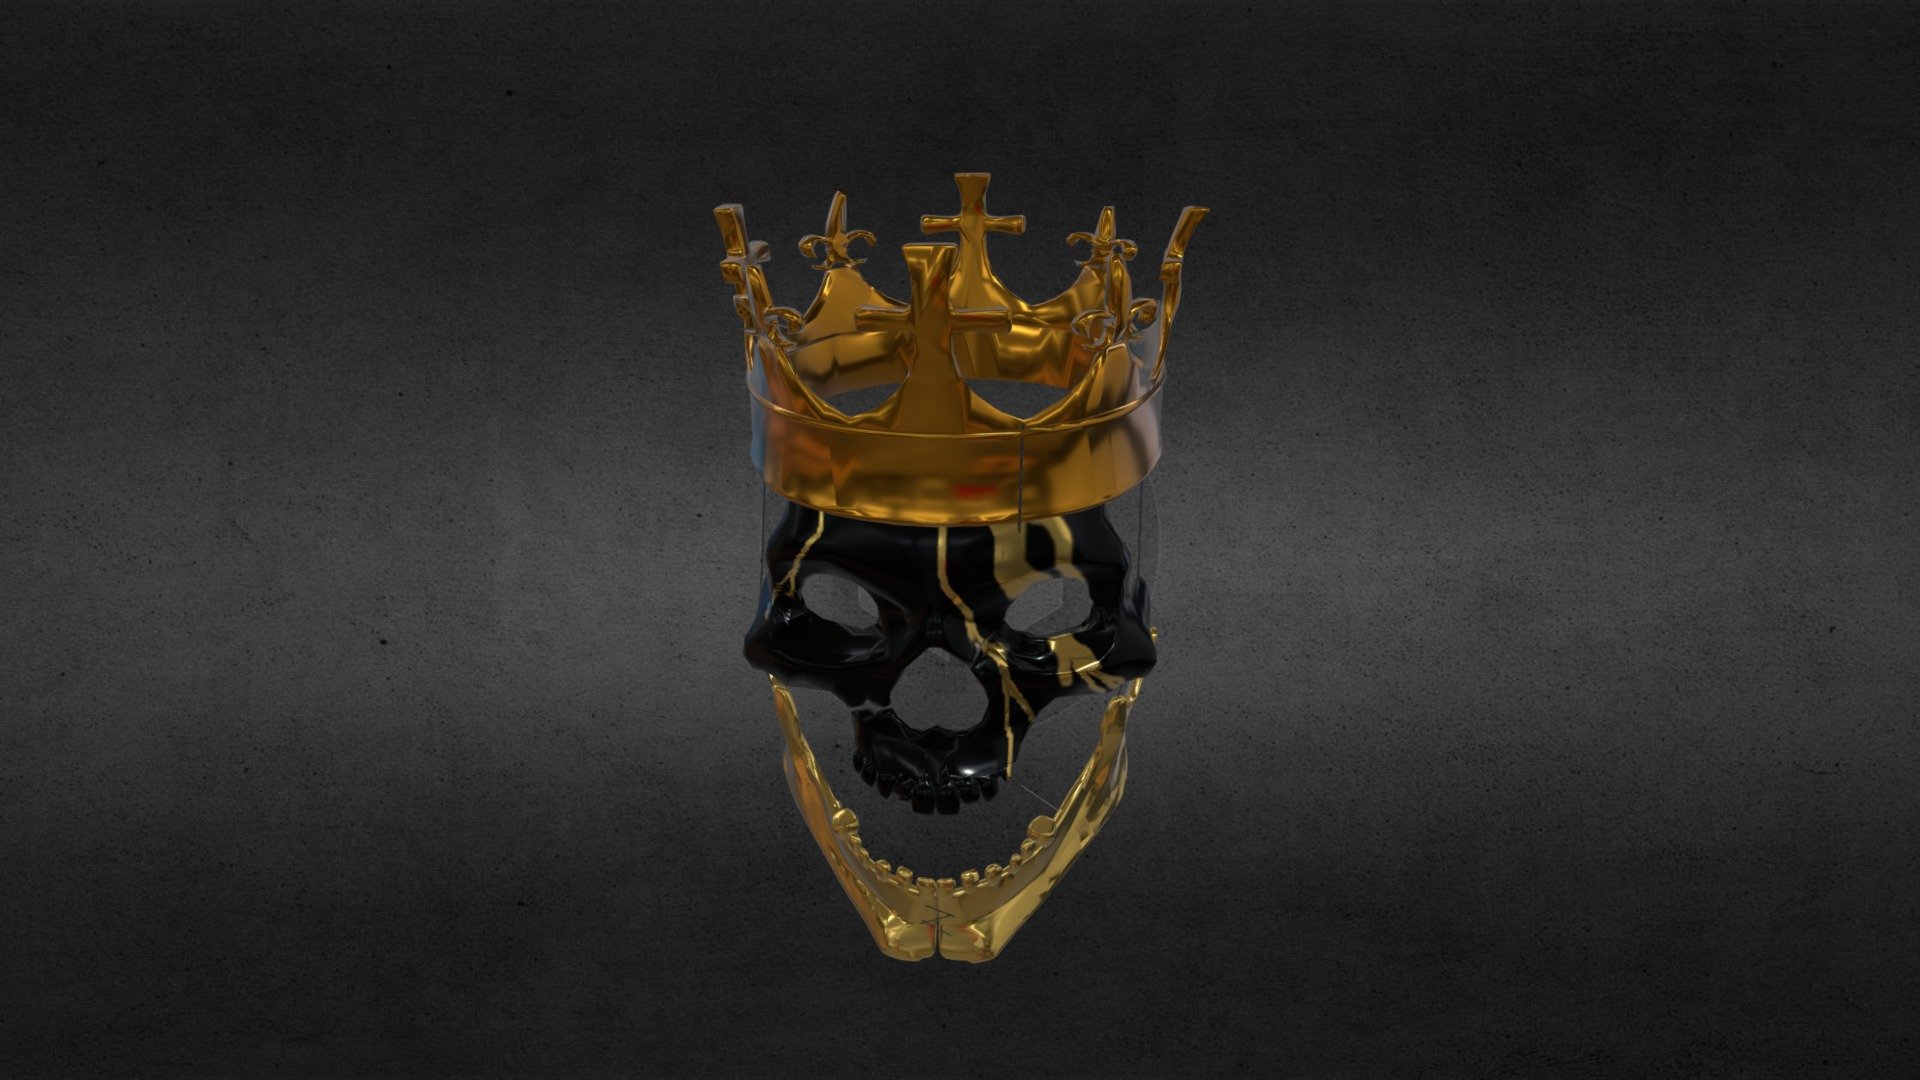 A second variant of the KingOfHearts Mask fan-made, free to use. The Golden Skull Mask with metallic material 3d model